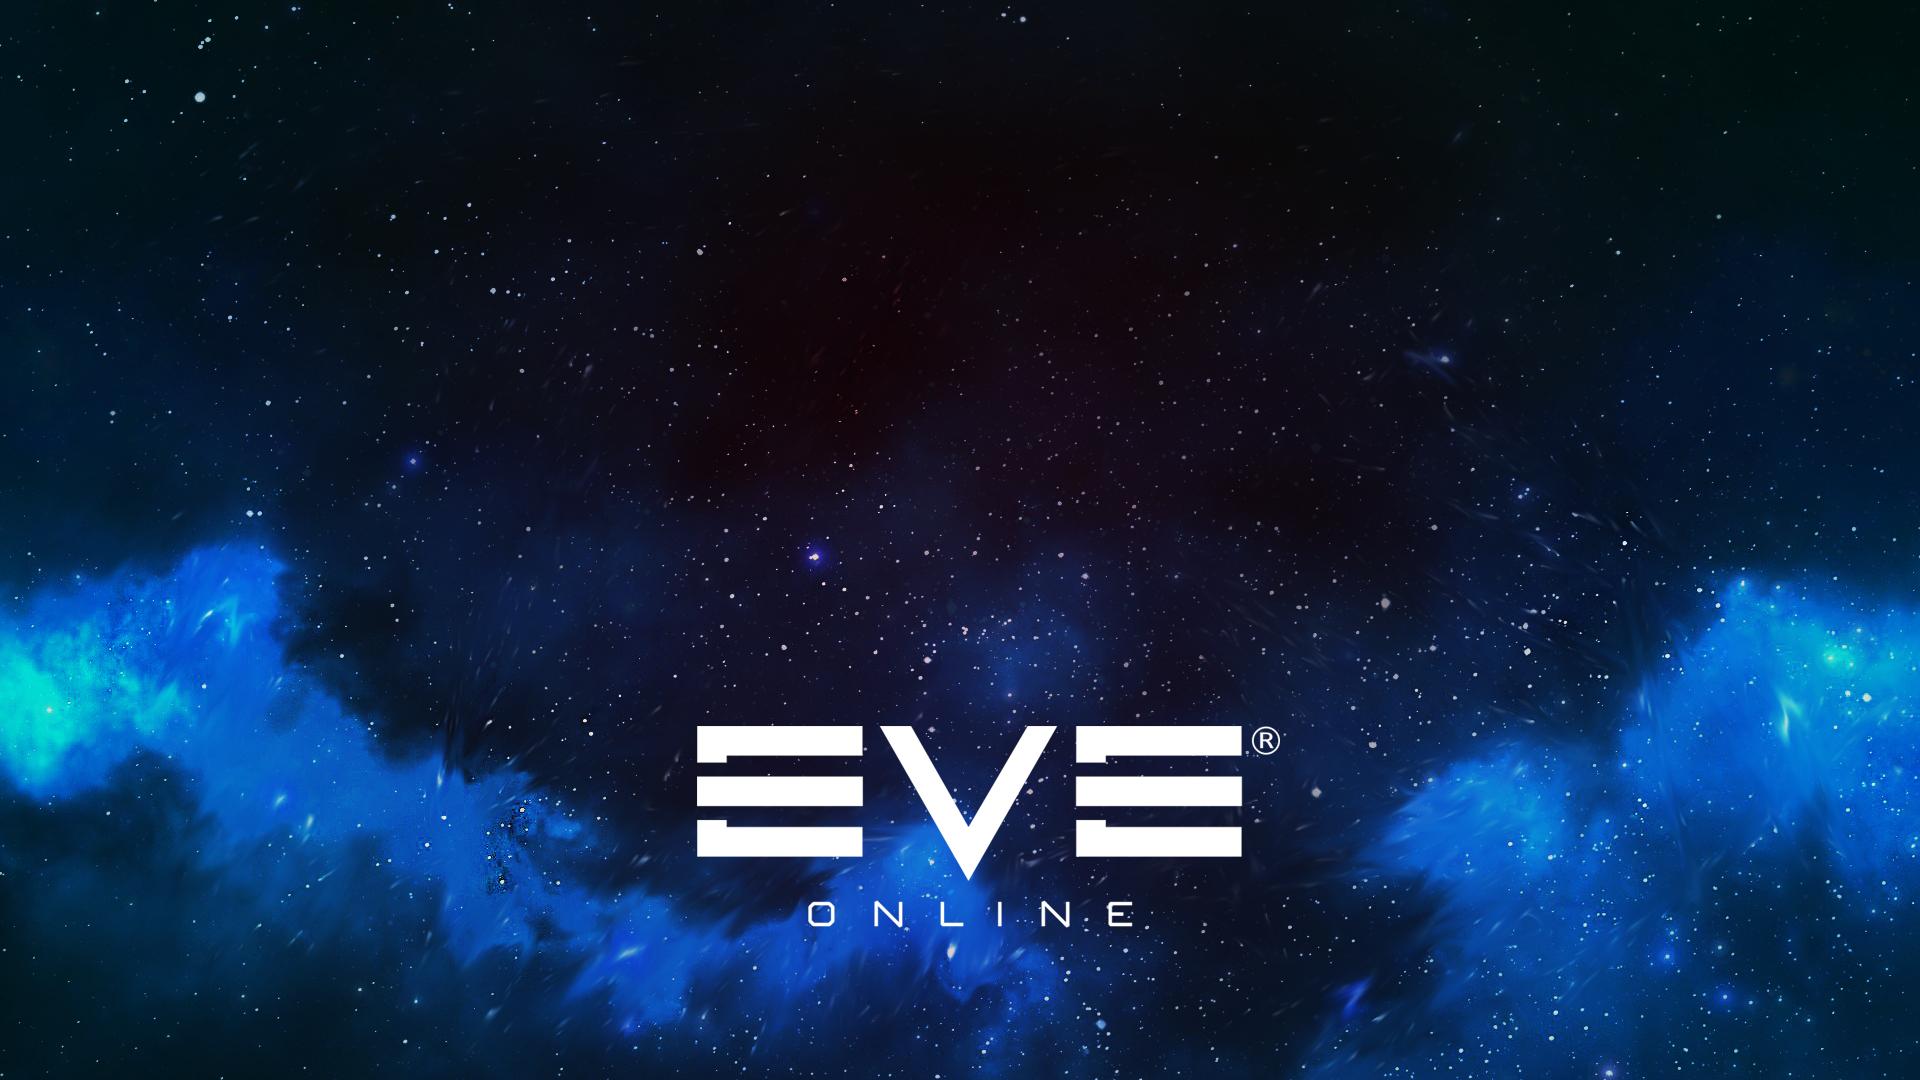 Download wallpaper for 240x320 resolution | EVE Online Stars Blue HD ...